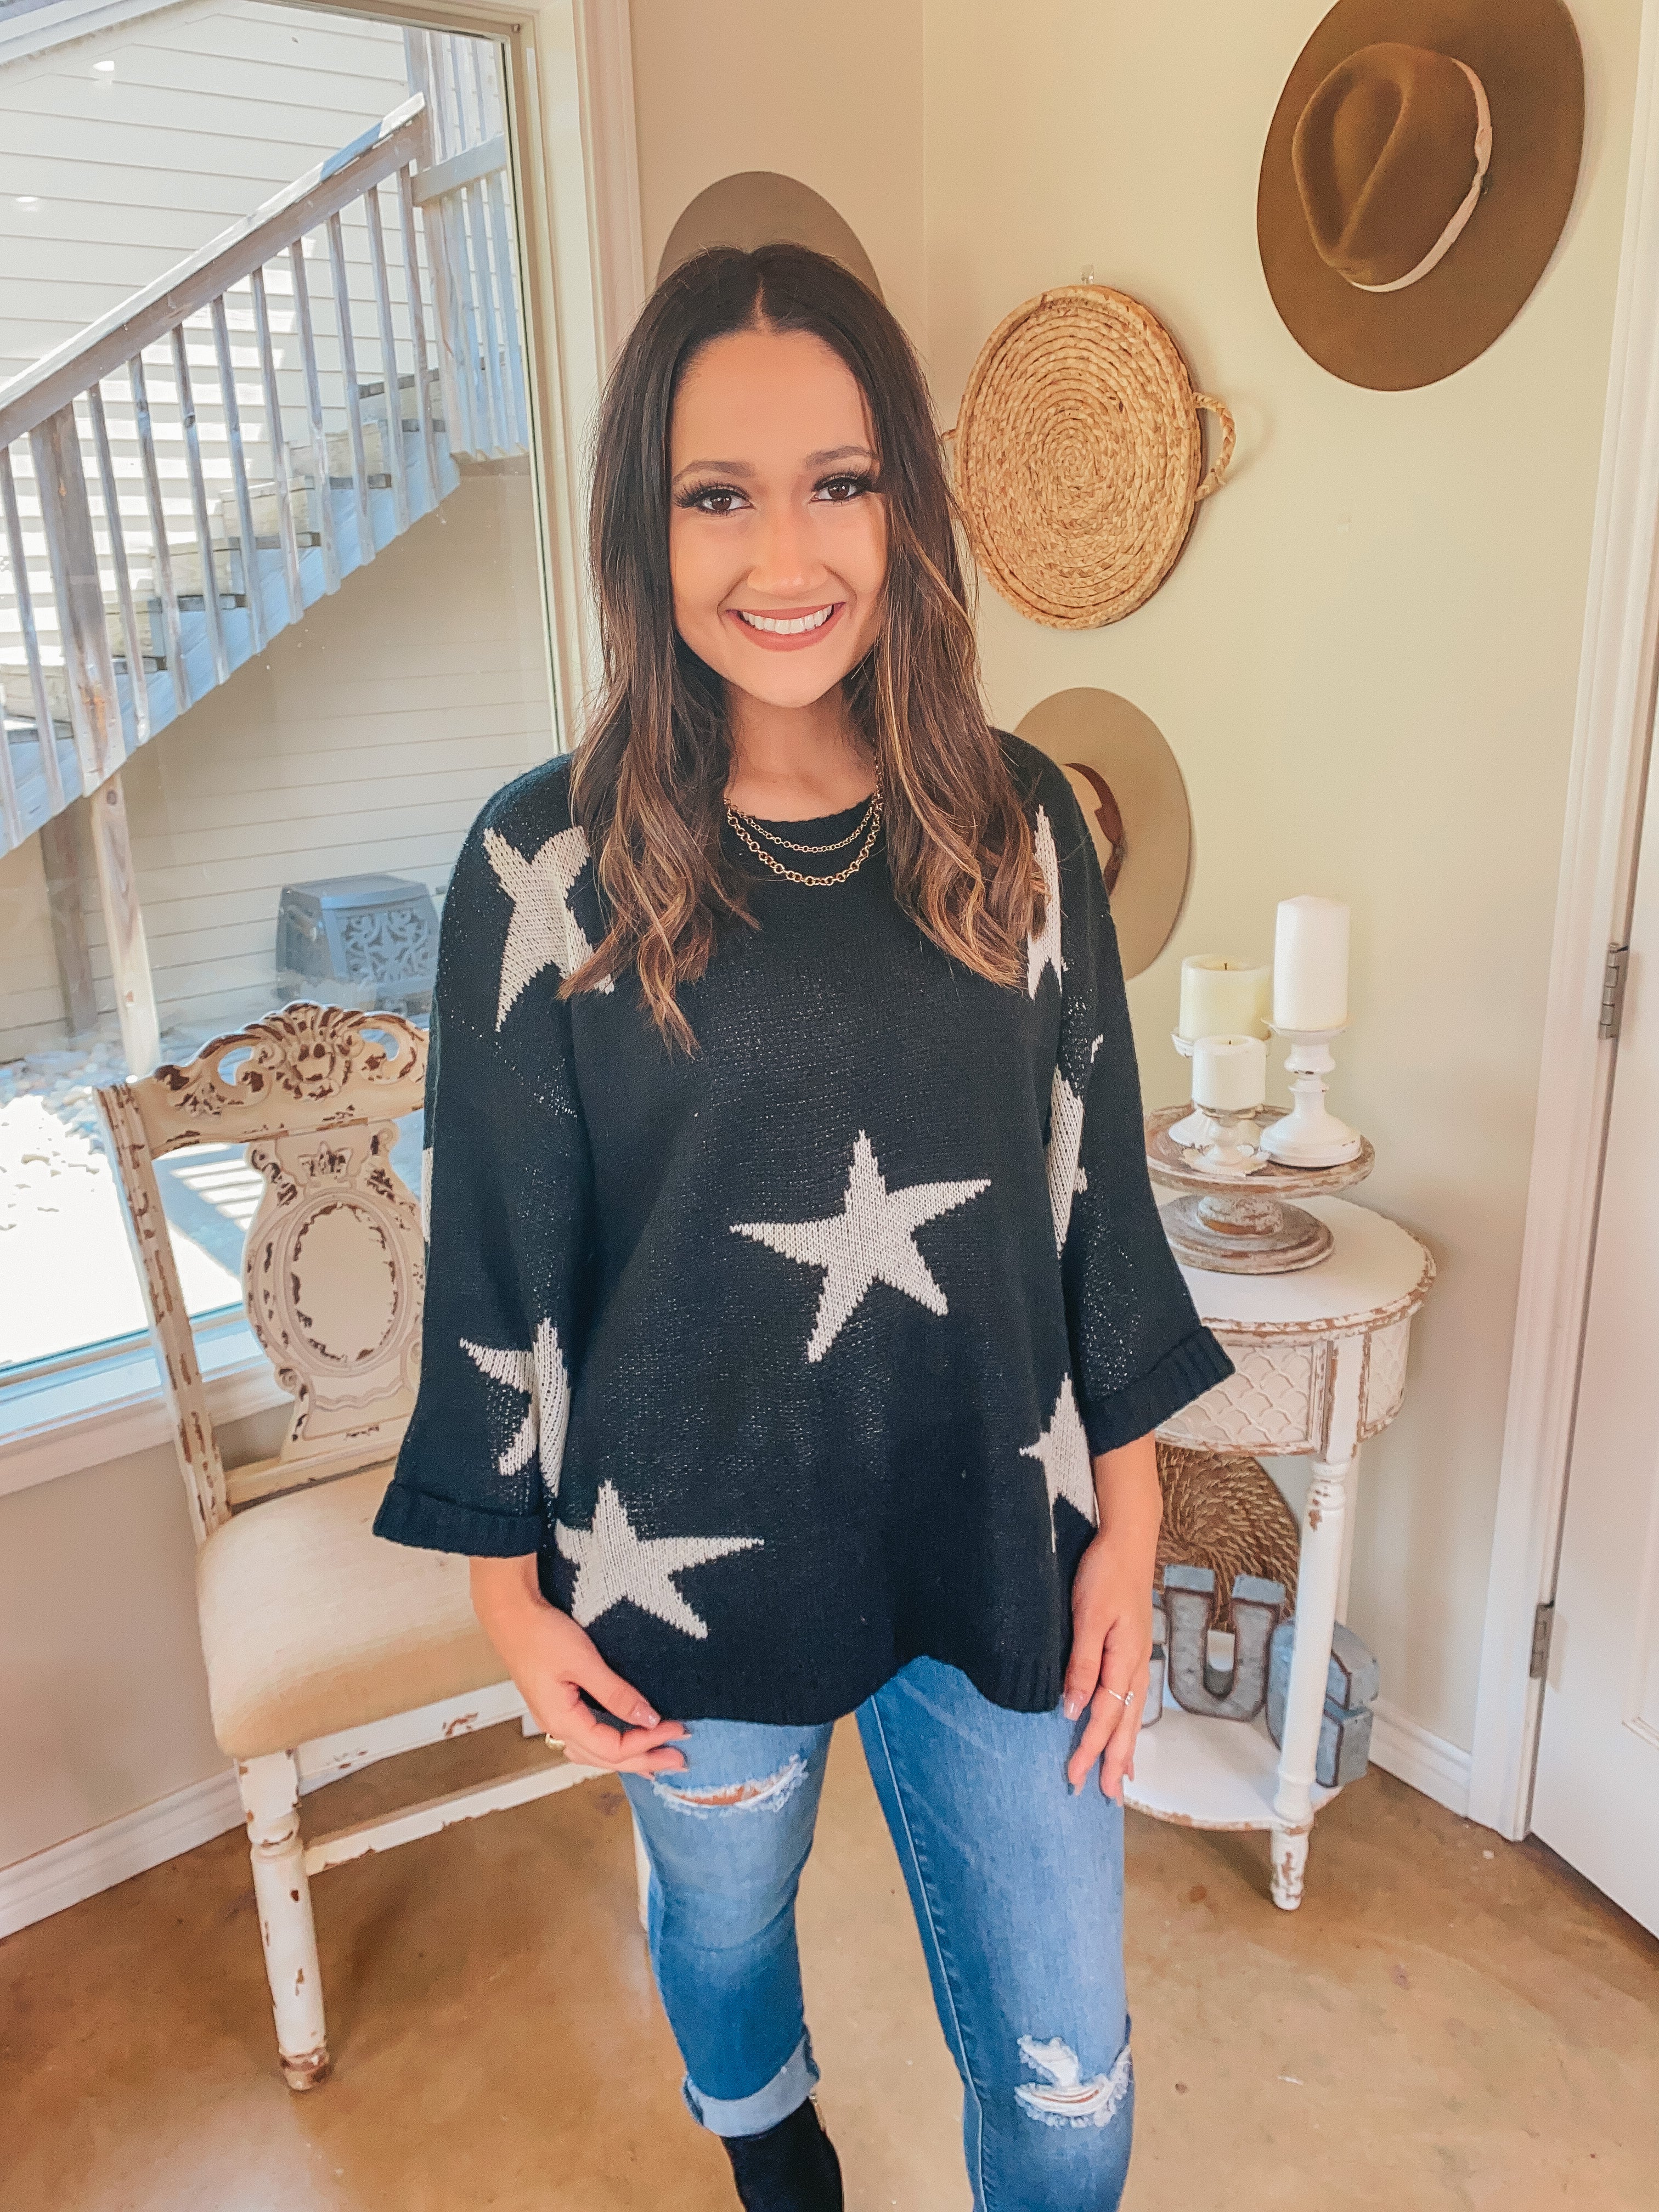 Brightest Dreams Star Print Oversized Sweater in Black - Giddy Up Glamour Boutique